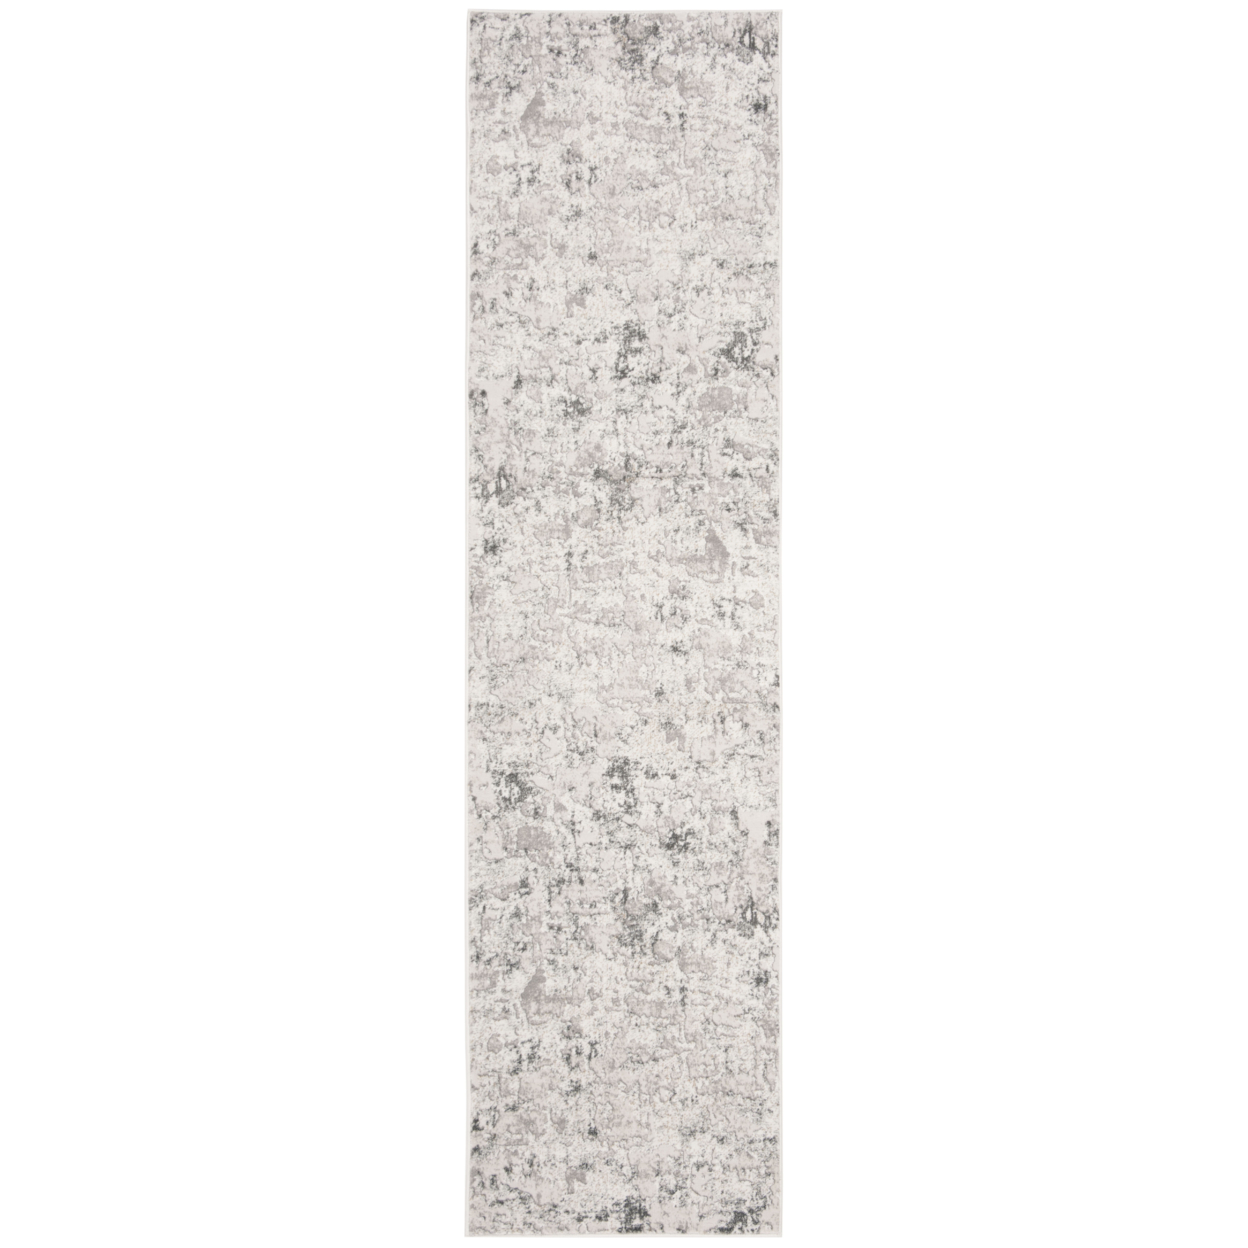 SAFAVIEH Vogue Collection VGE144A Beige / Charcoal Rug - 2' X 12'